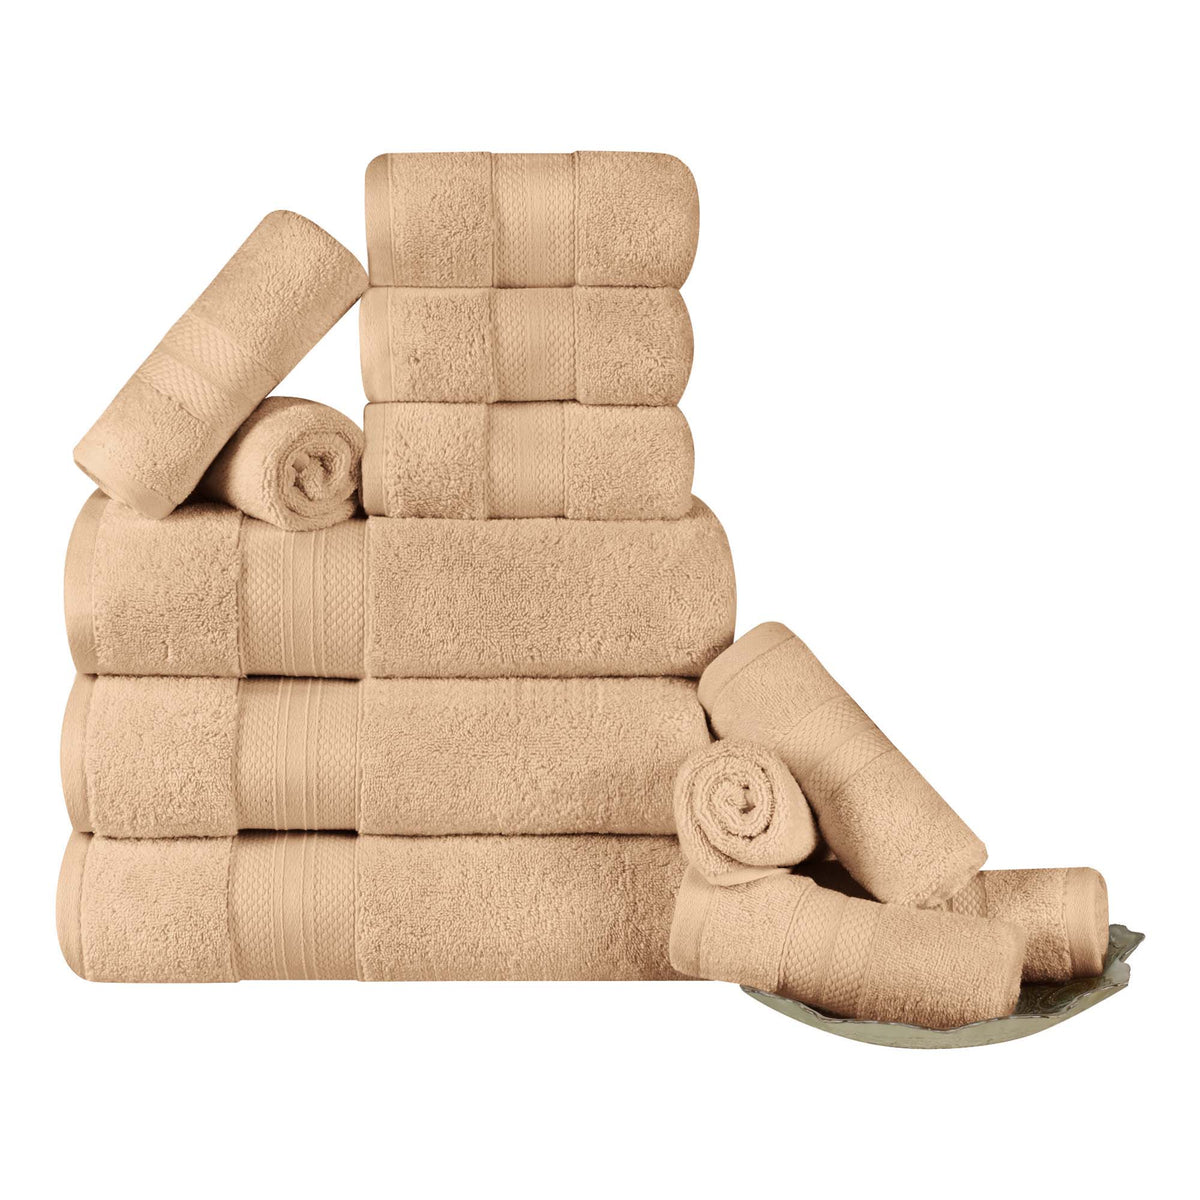 Turkish Cotton Highly Absorbent Solid 12 Piece Ultra Plush Towel Set